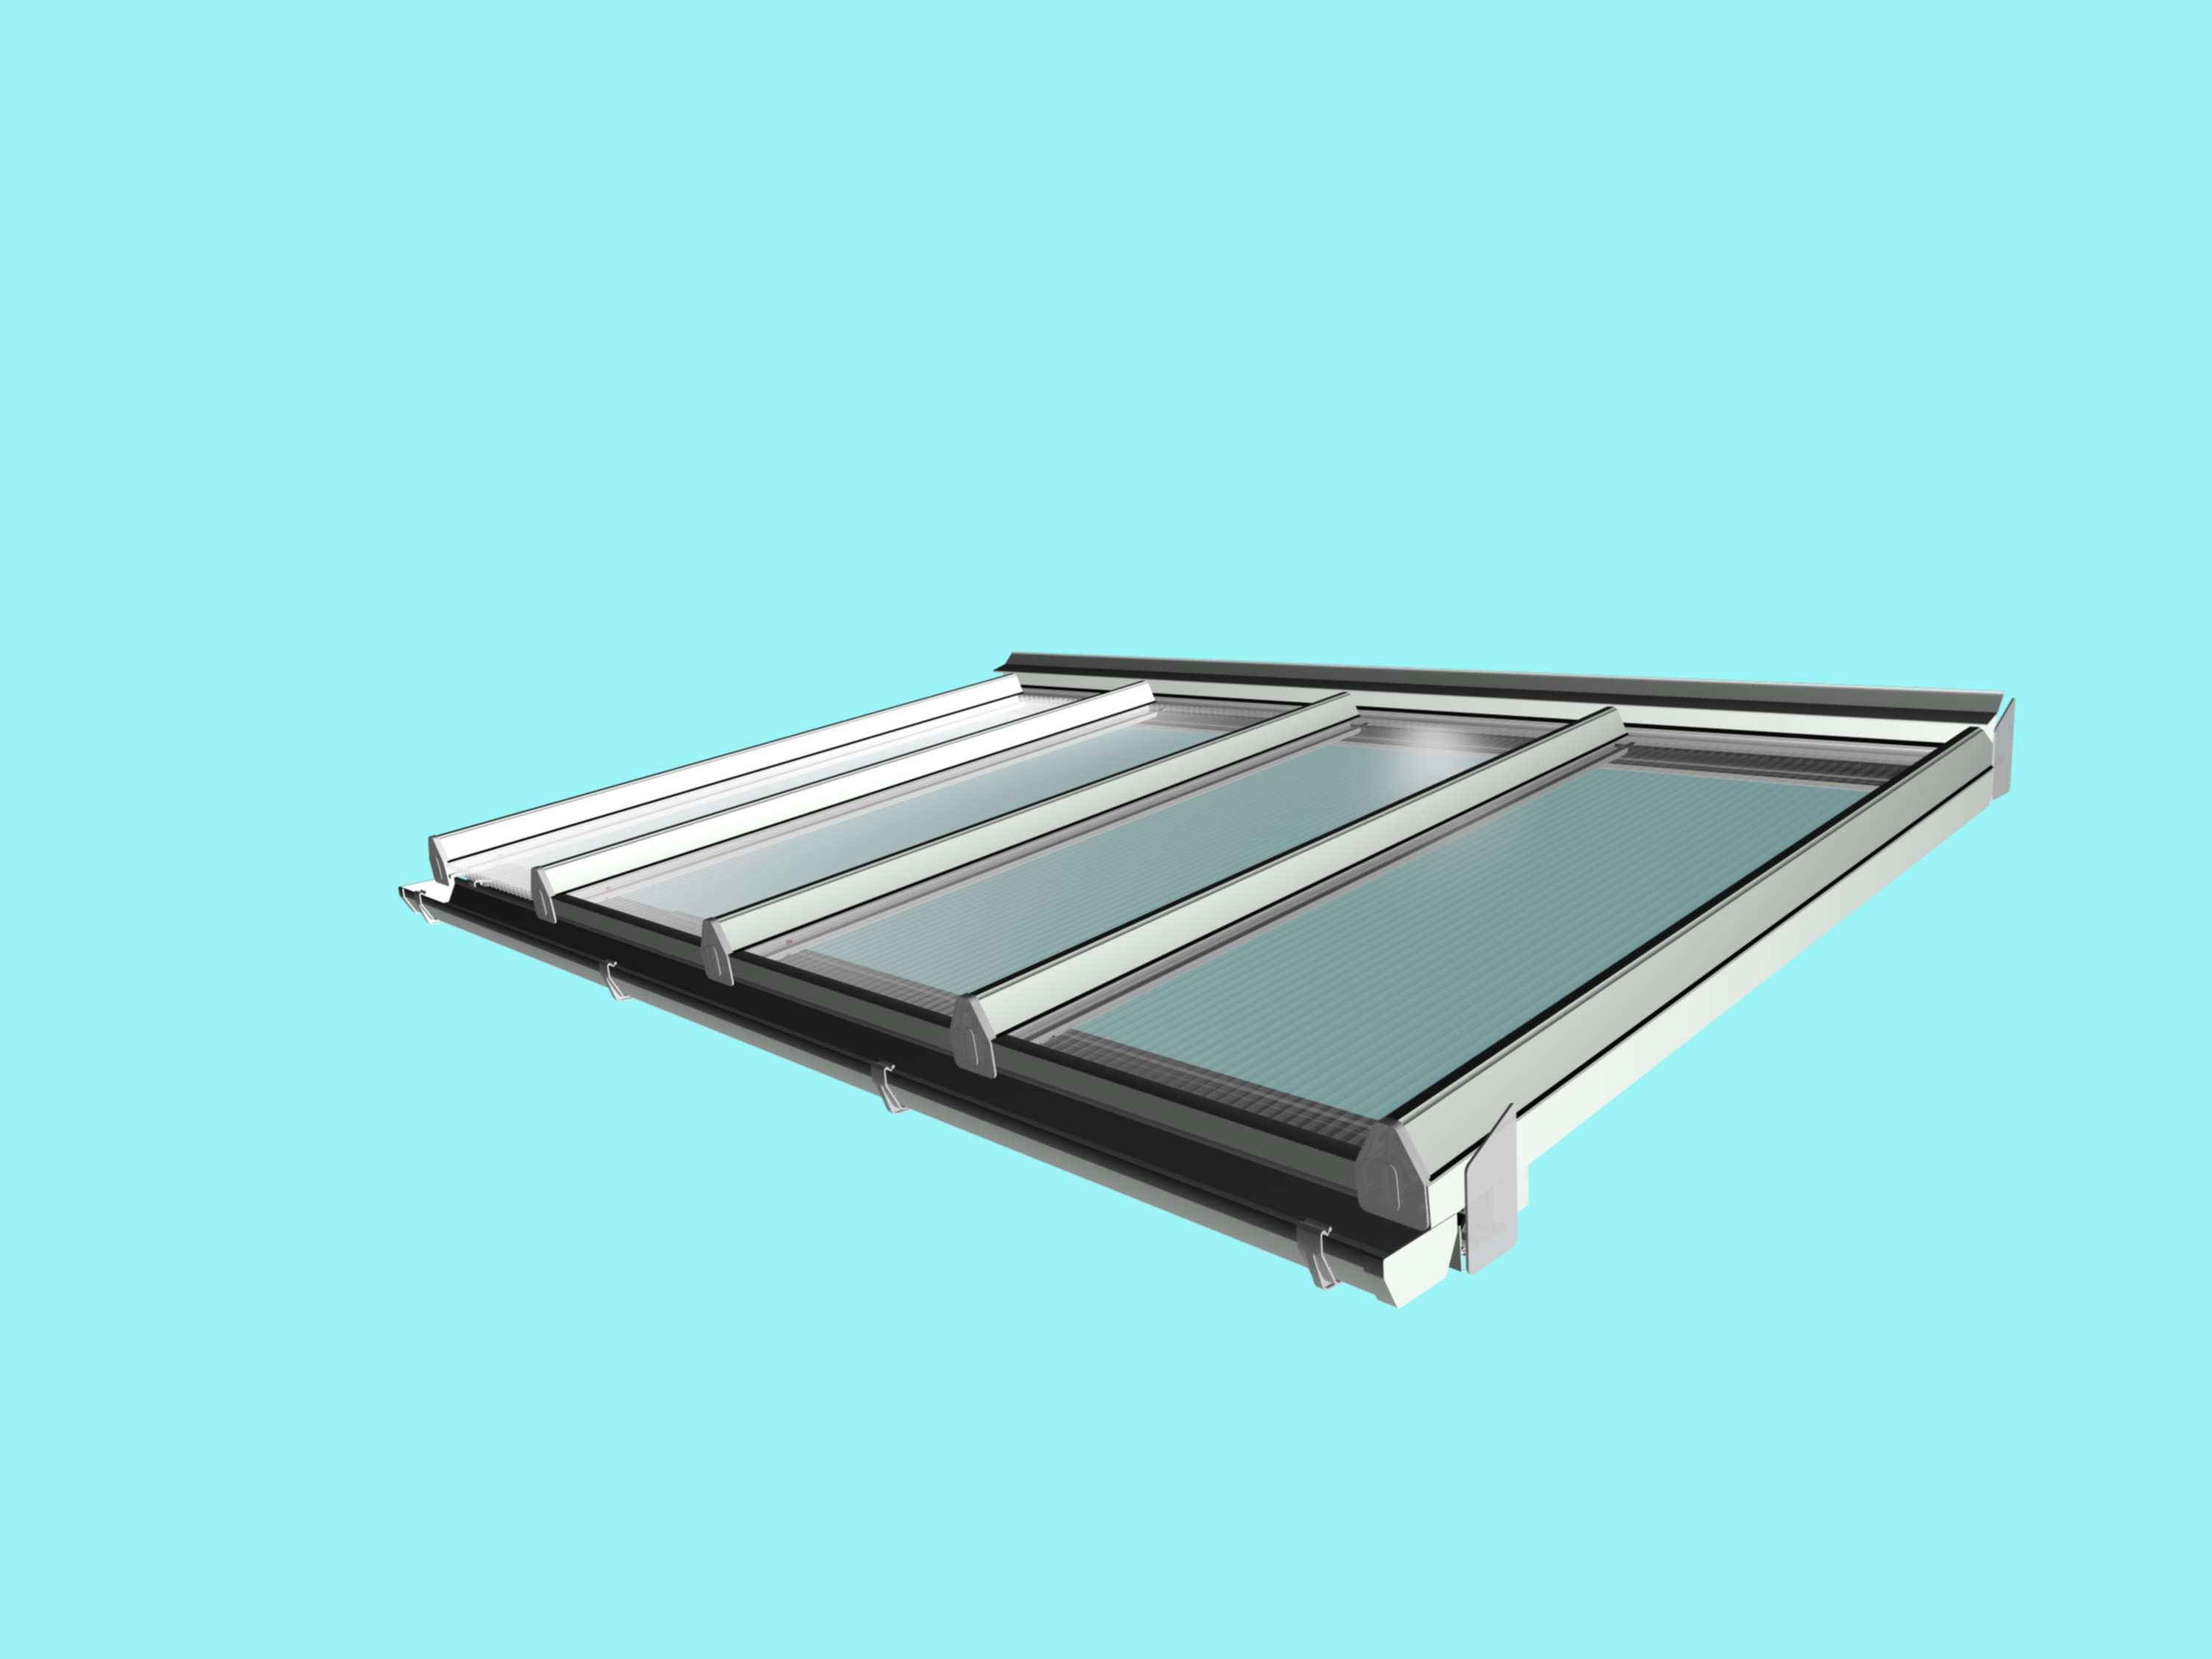 Self-Supporting DIY Conservatory Roof Kit for 25mm polycarbonate, 6.0m wide x 3.0m Projection from Omega Build